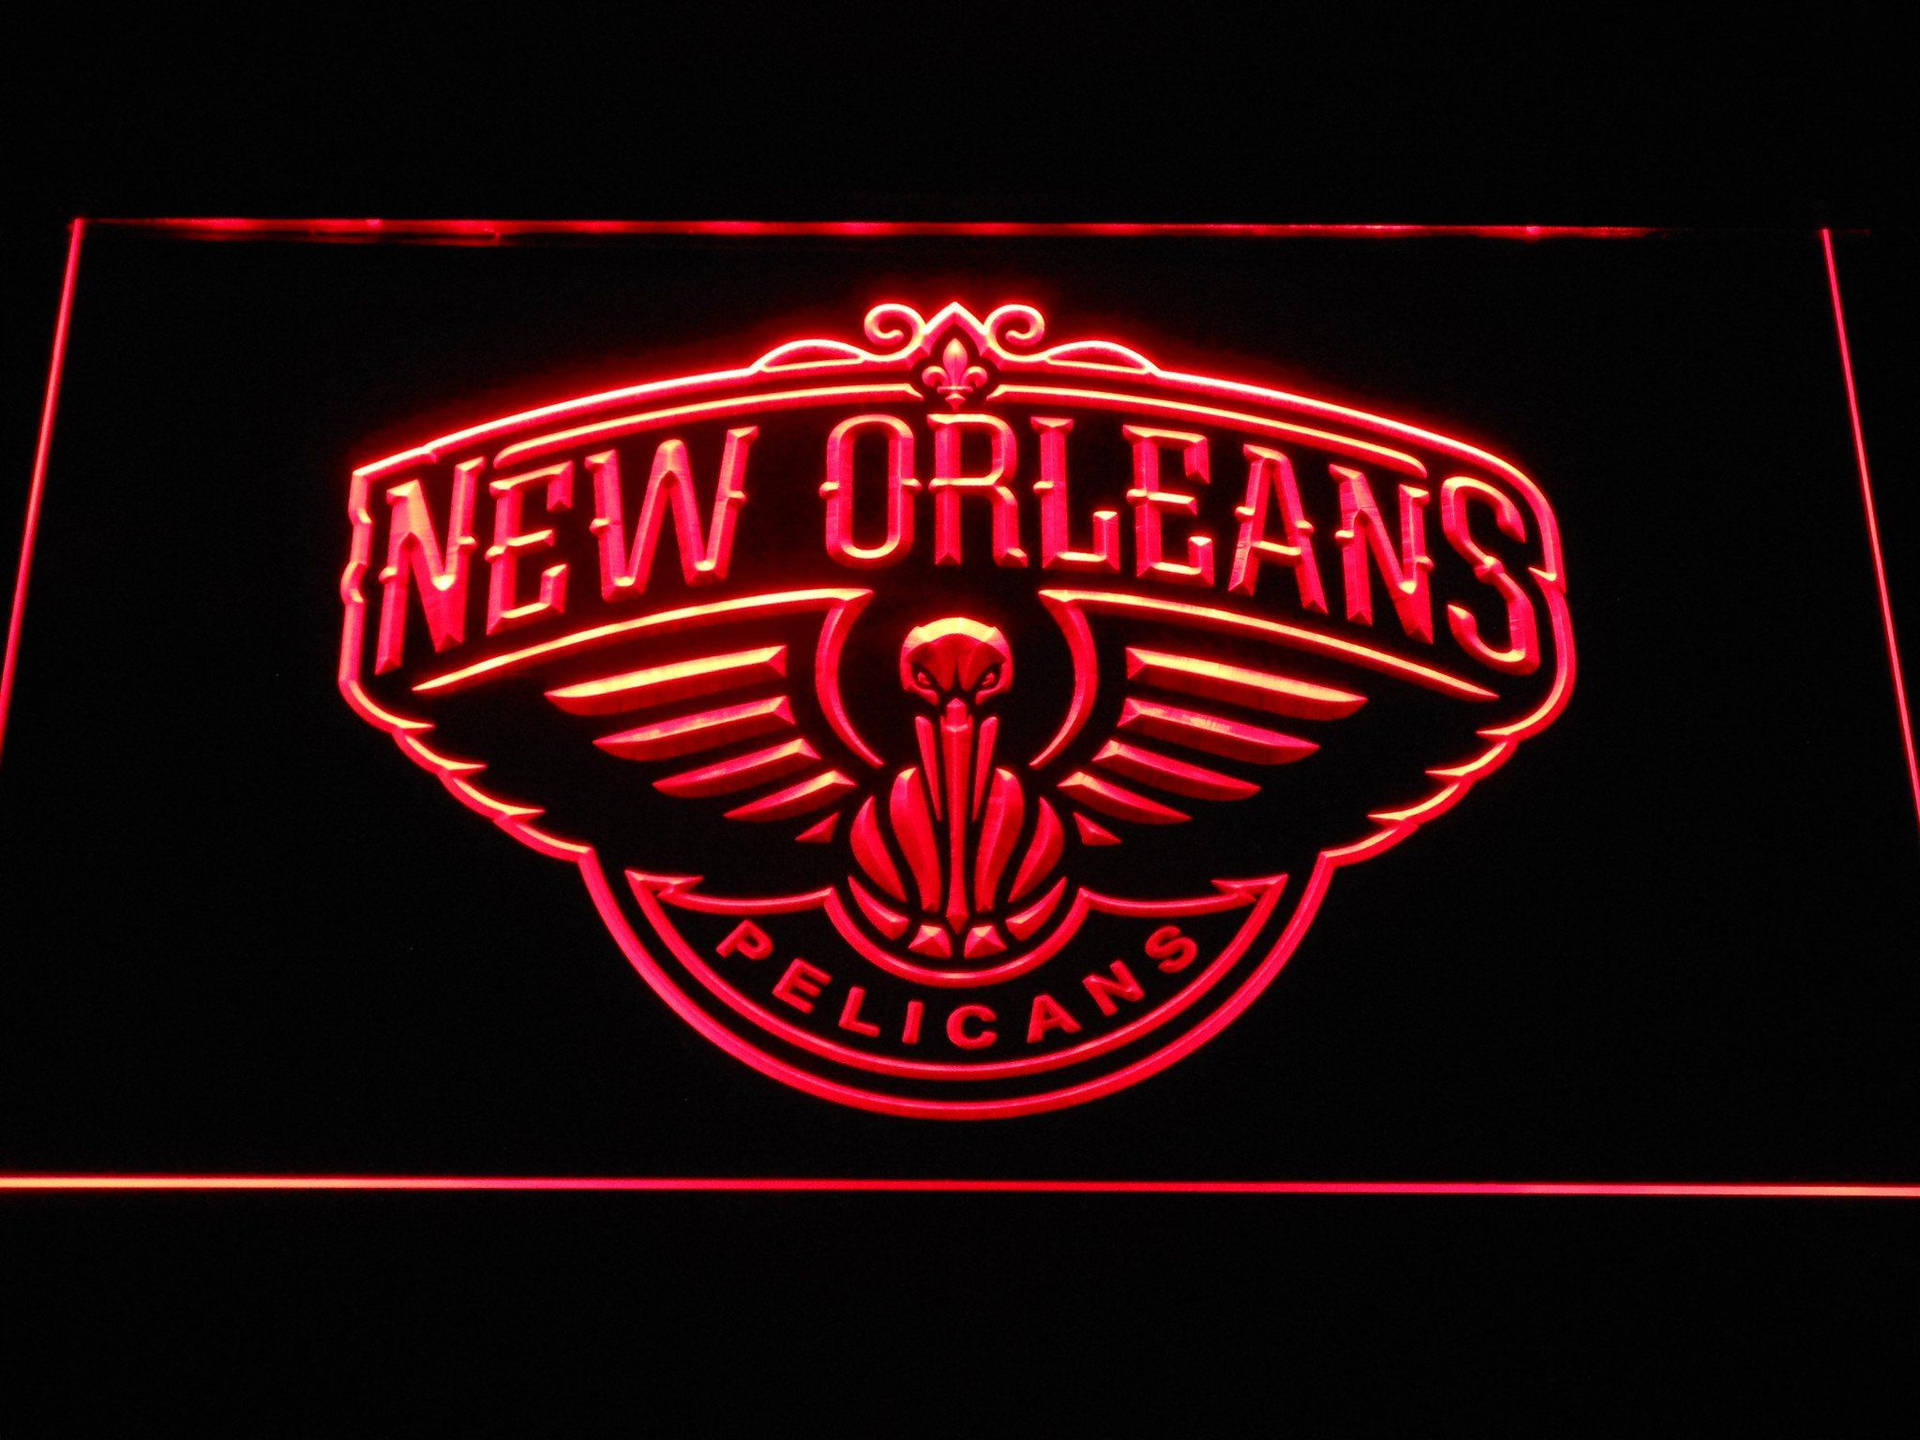 New Orleans Pelicans Neon Red Sign Background